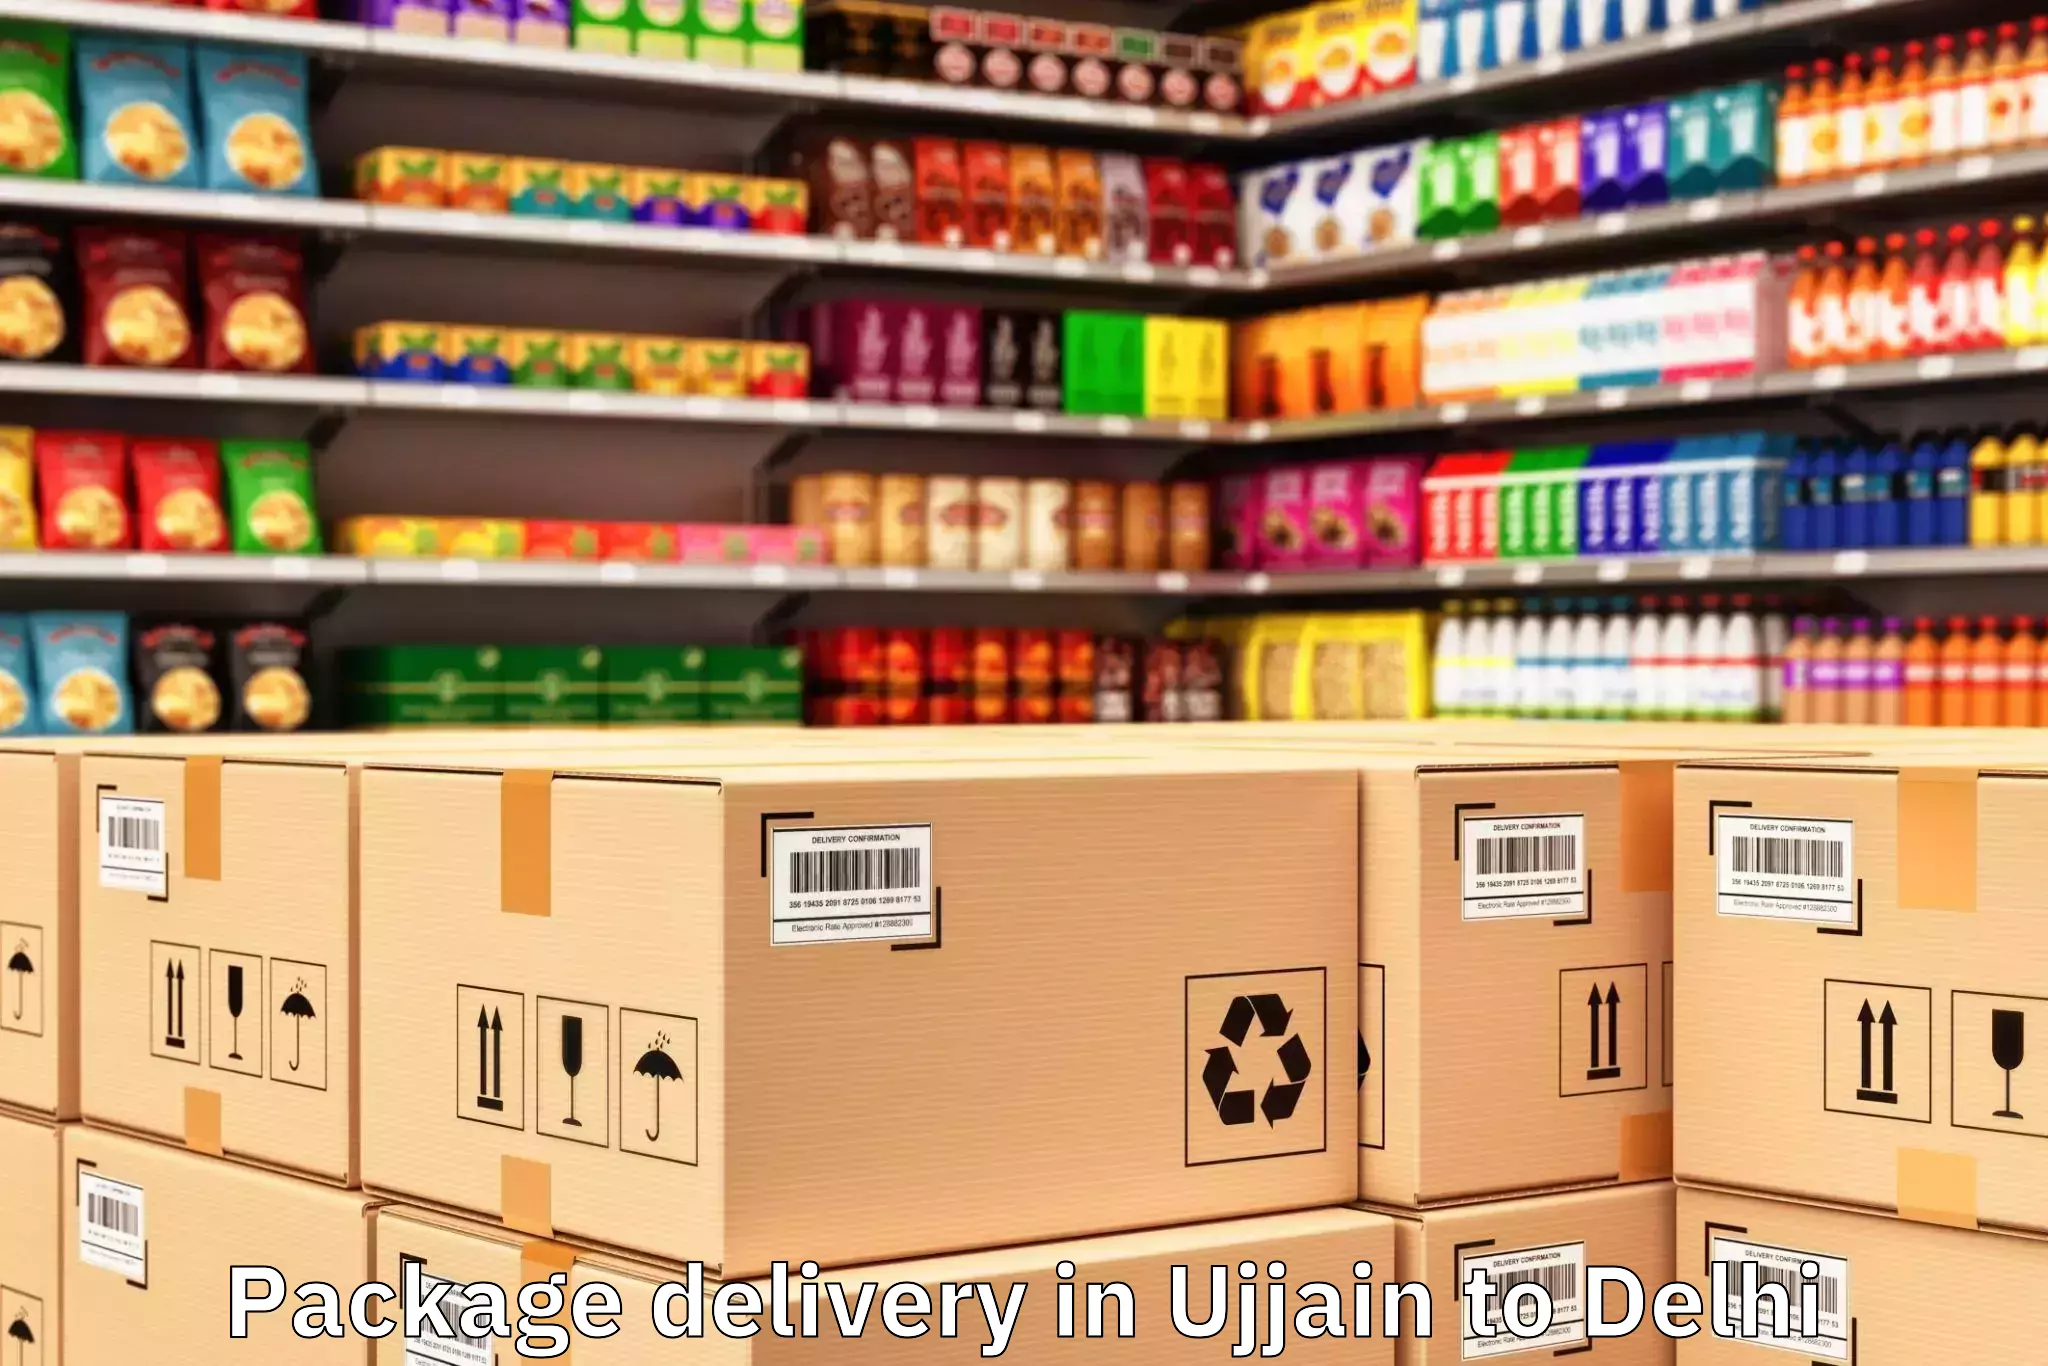 Easy Ujjain to Unity One Mall Janakpuri Package Delivery Booking